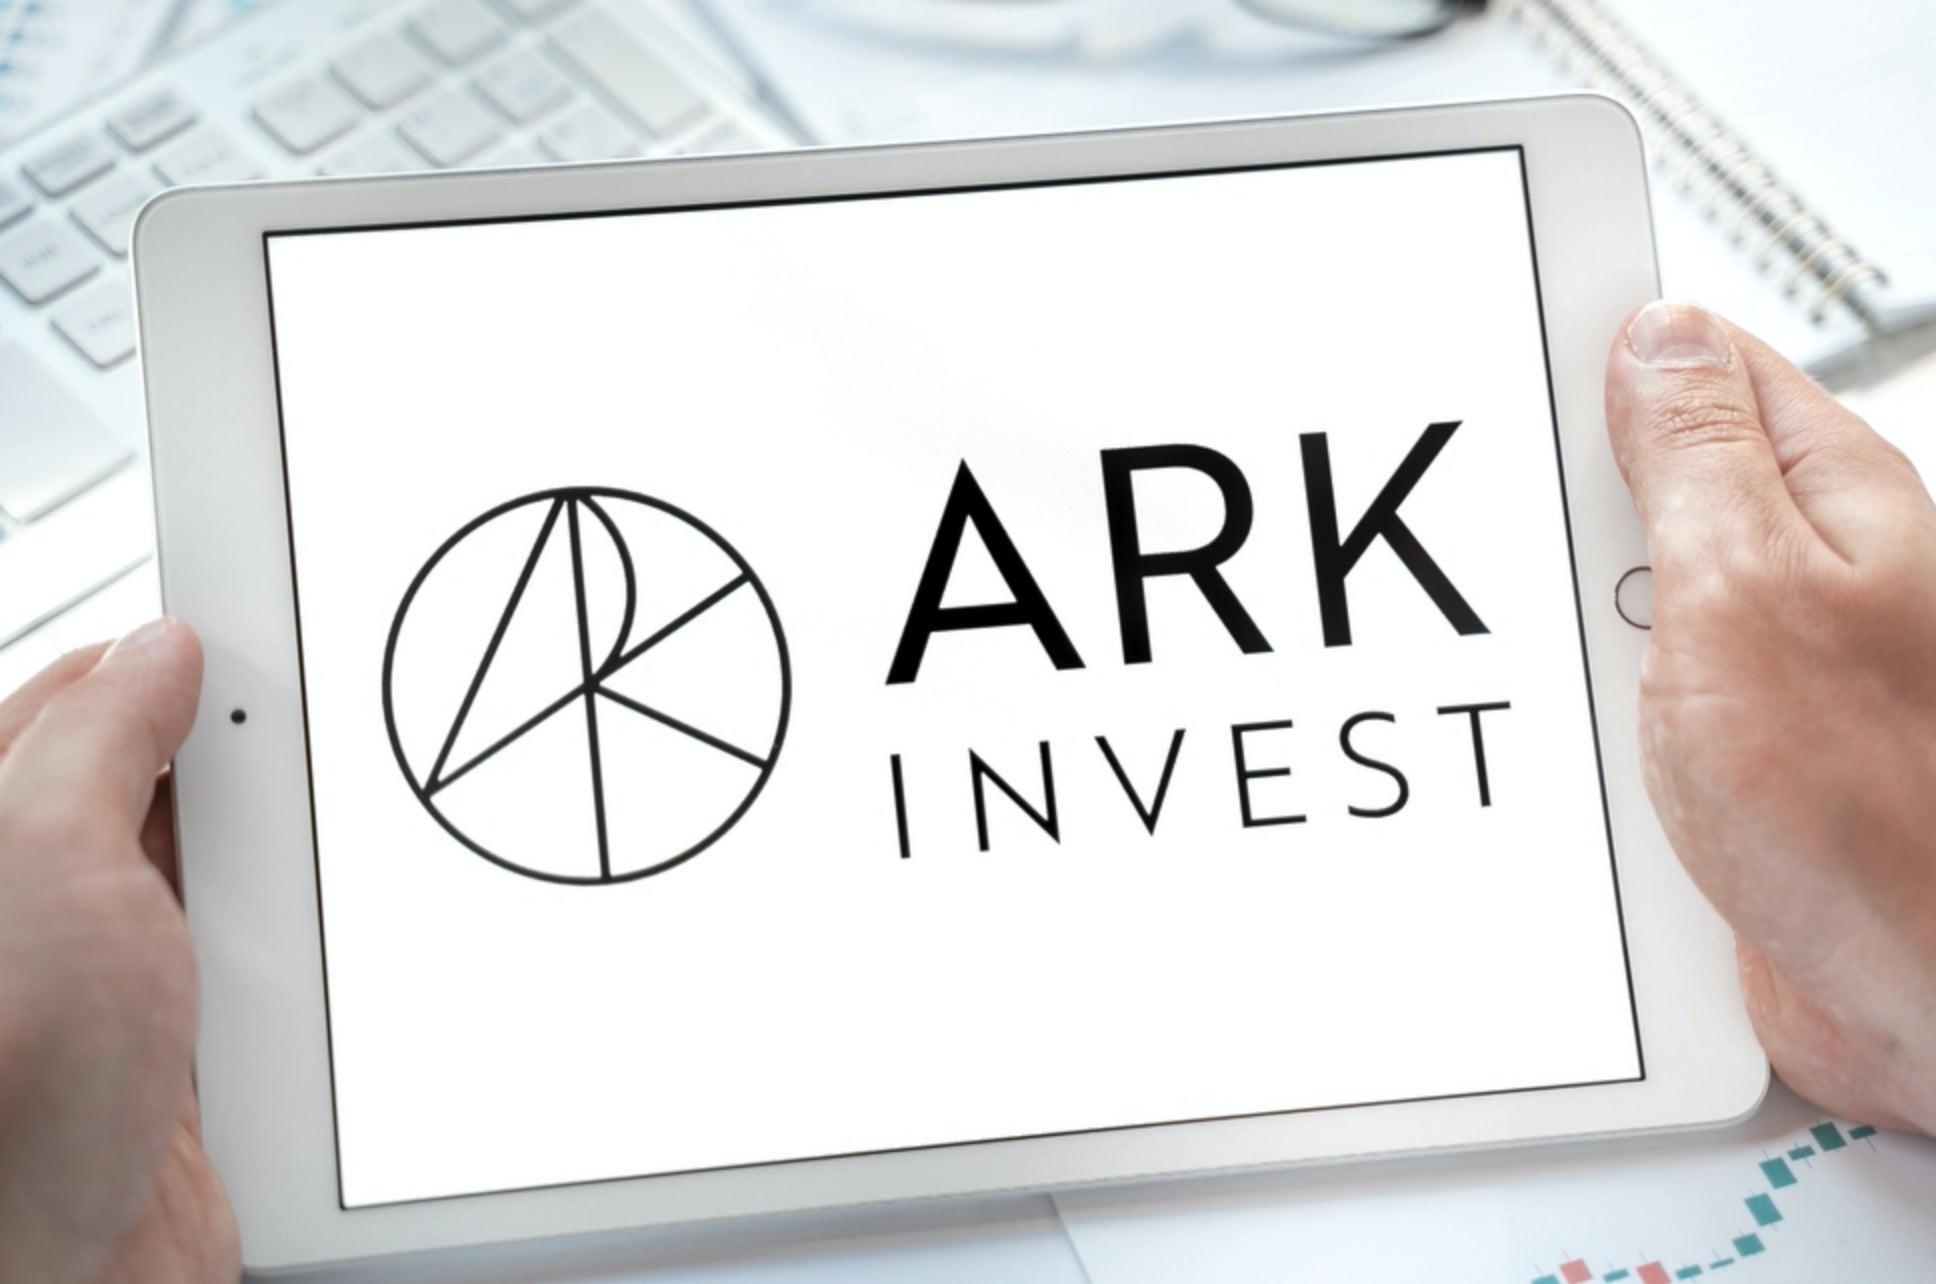 Cathie Wood's Ark Invest Buys Grayscale Bitcoin Trust Shares Worth $2.8M